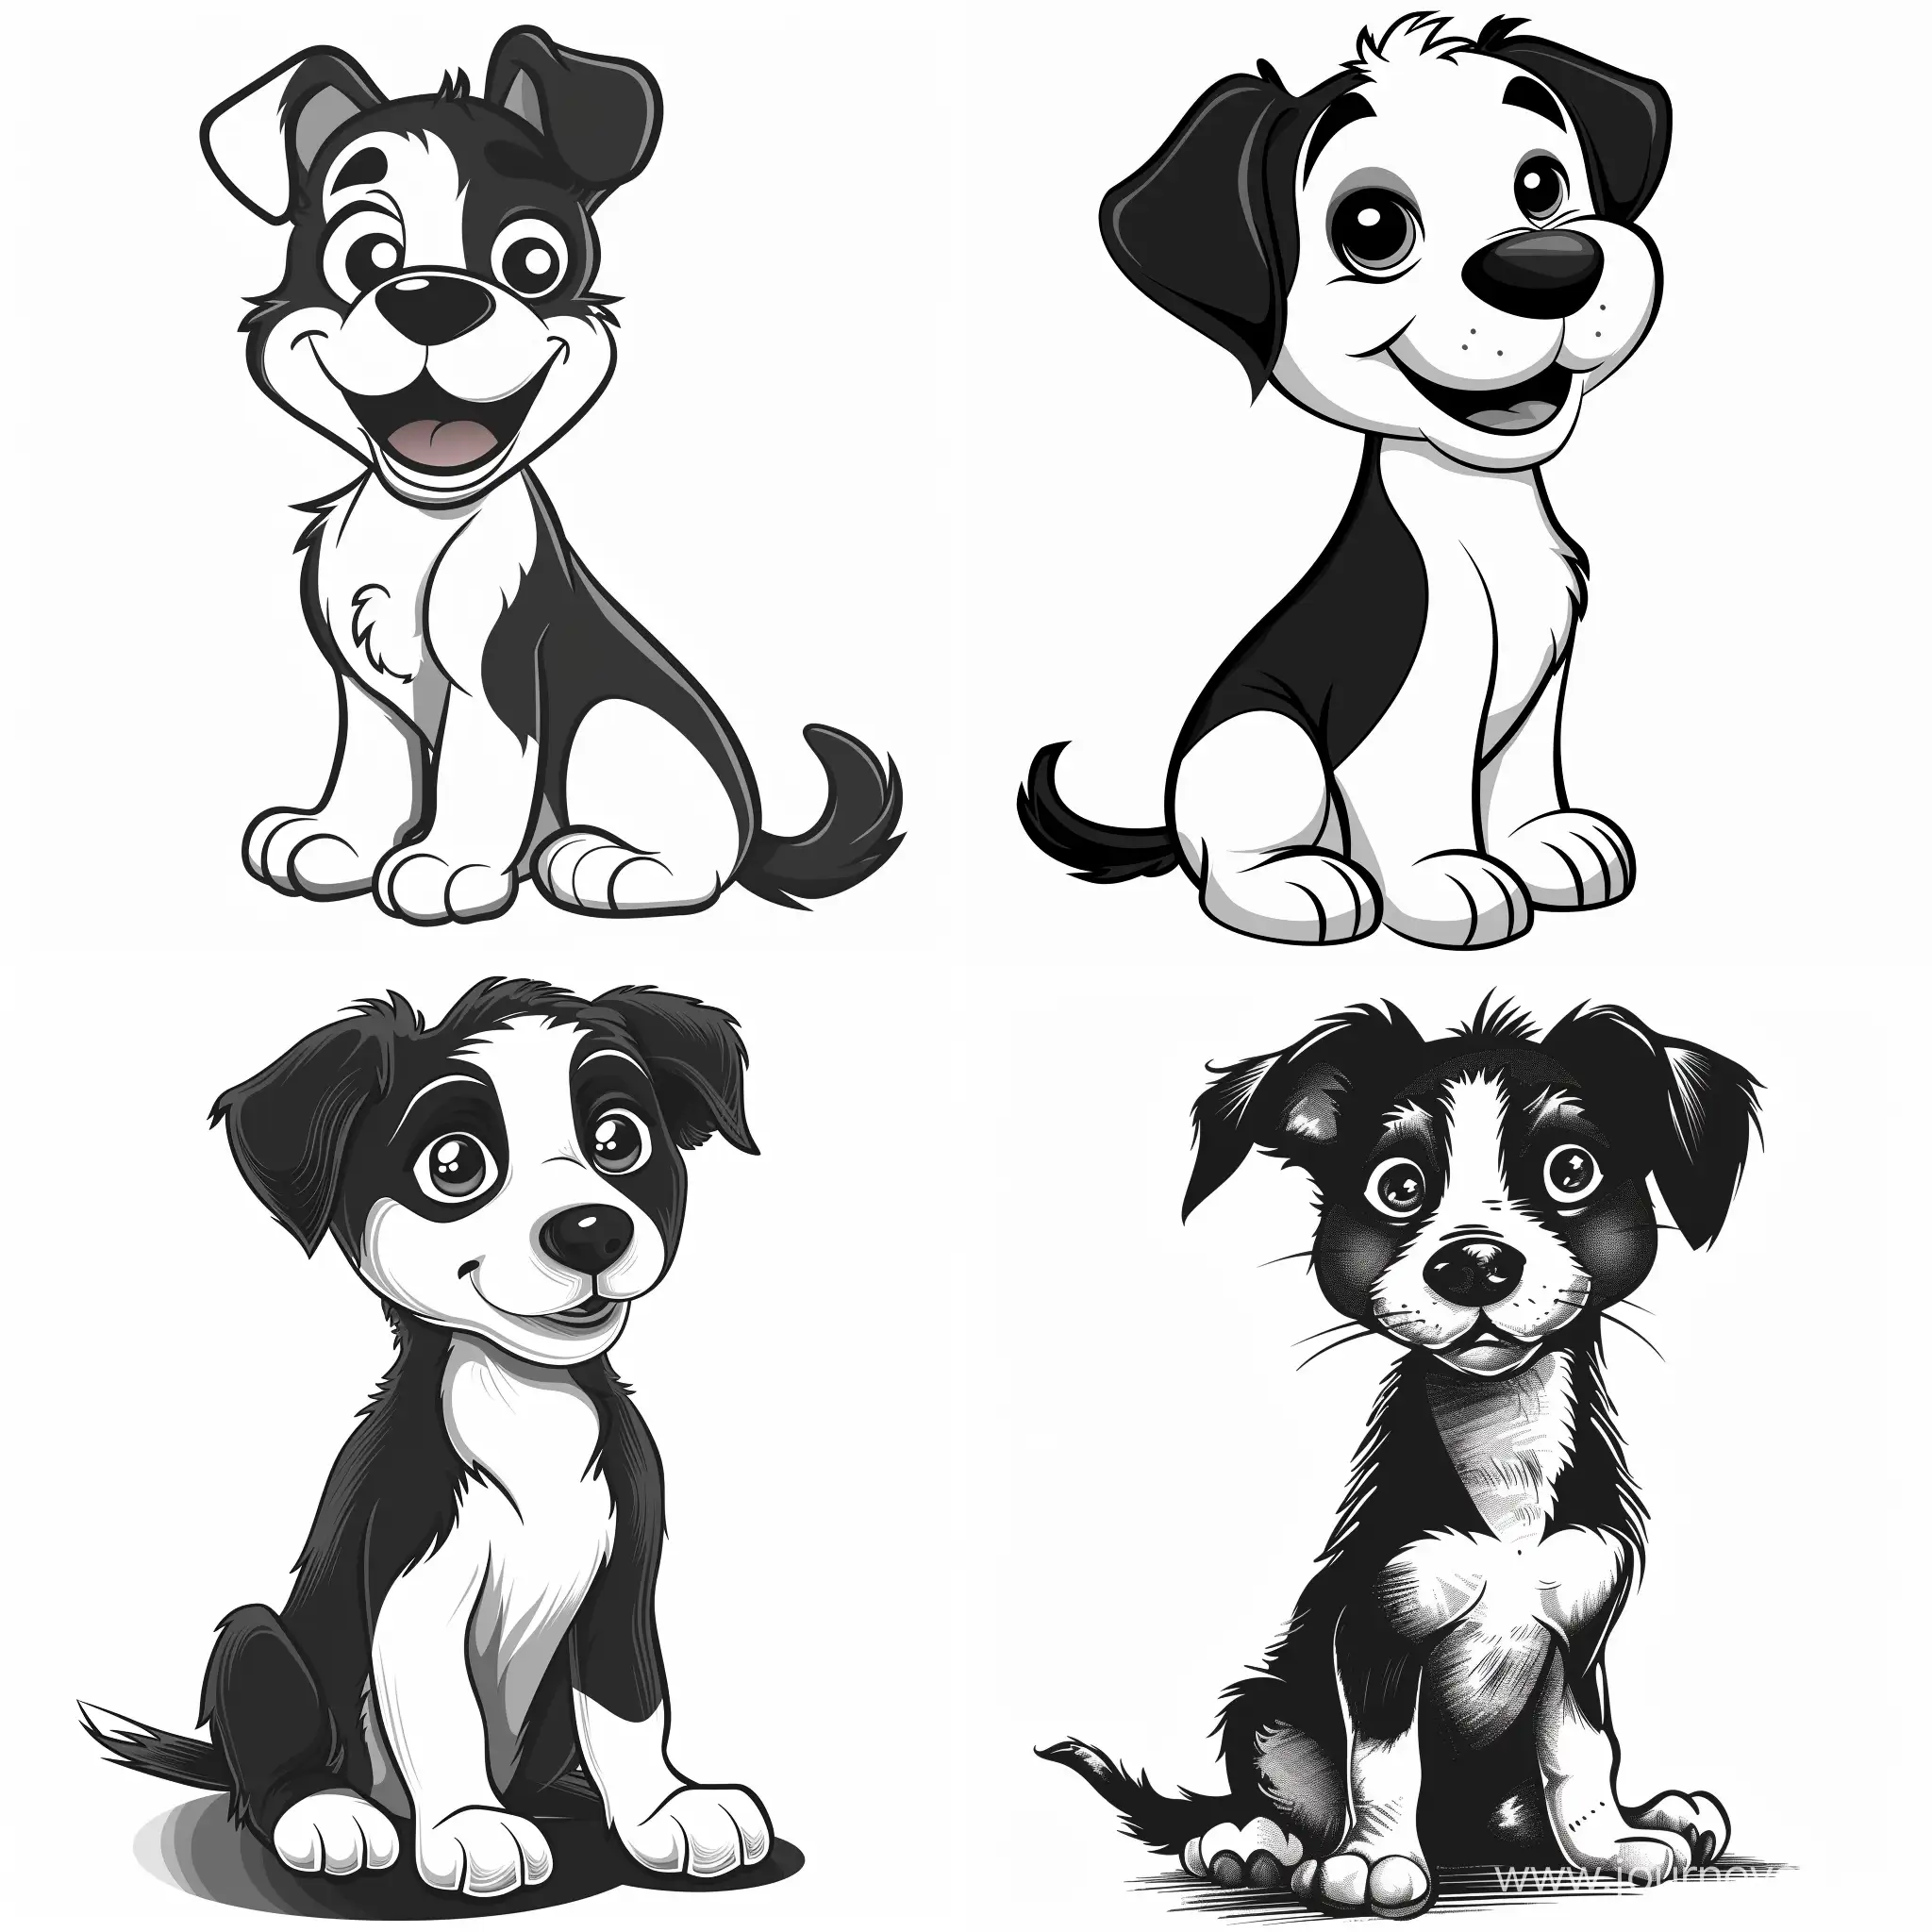 Cartoon dog in black and white